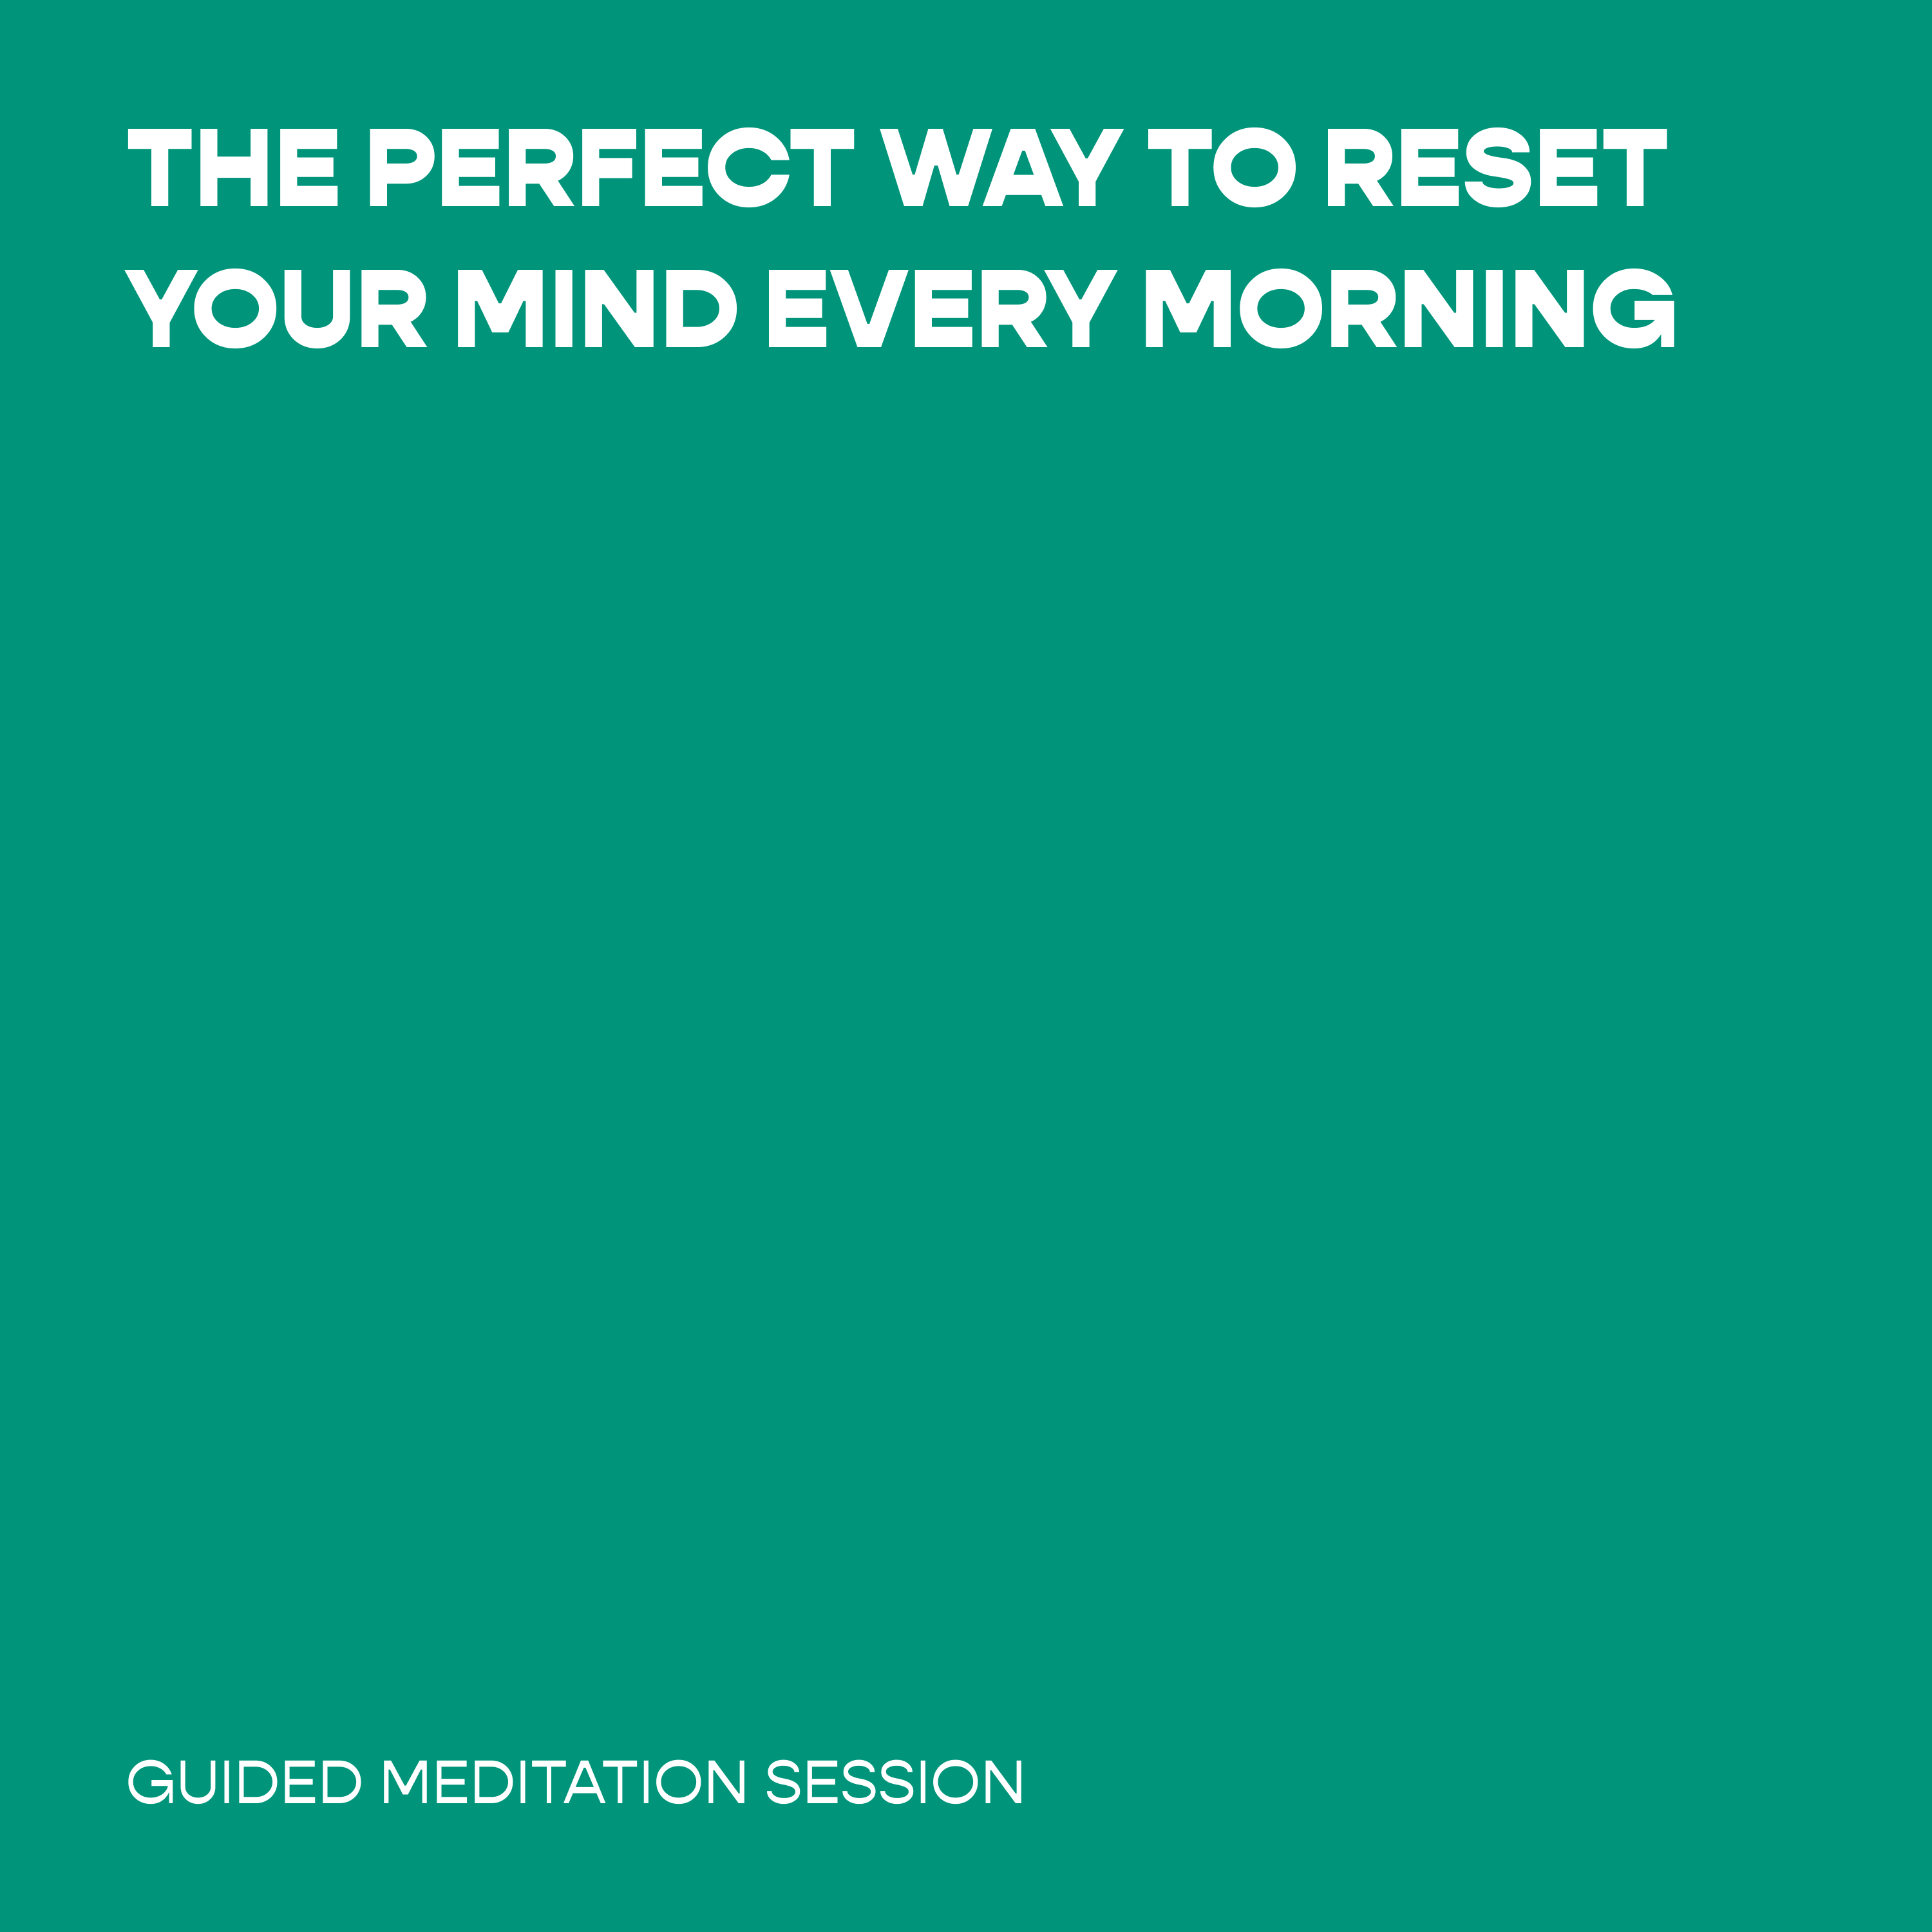 The Perfect Way to Reset Your Mind Every Morning